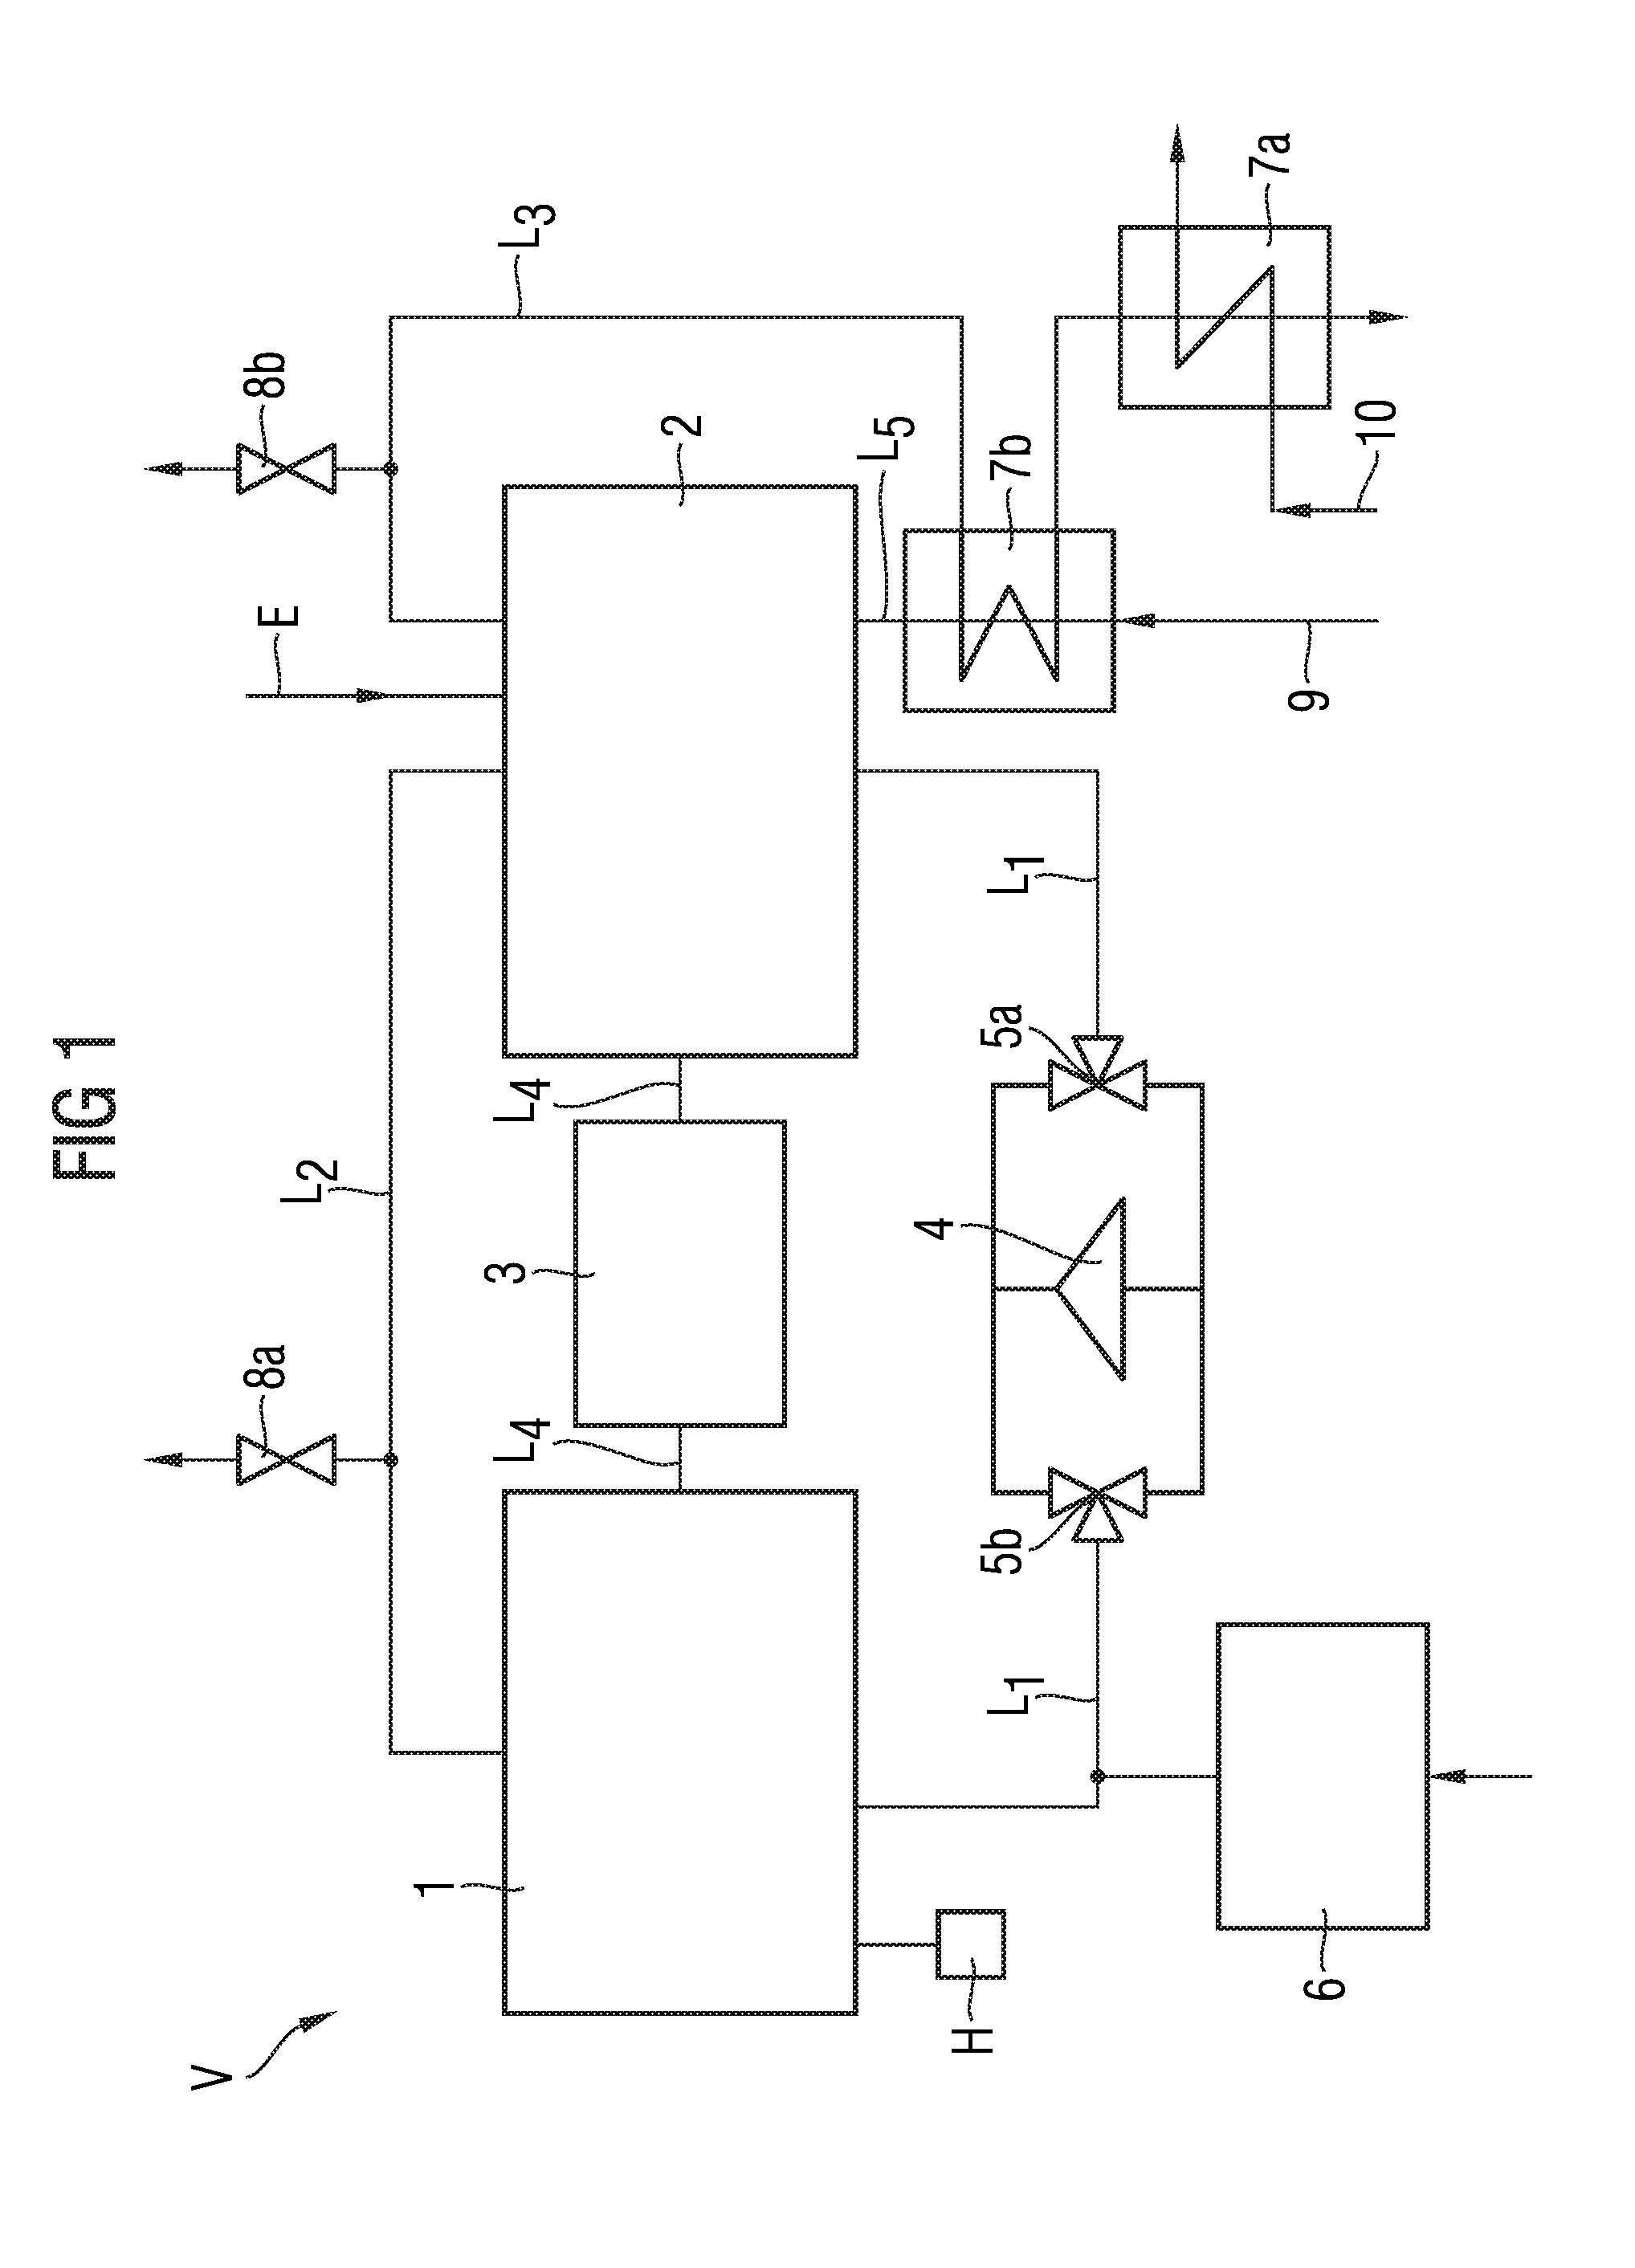 Energy storage device and method for the reversible storage of energy